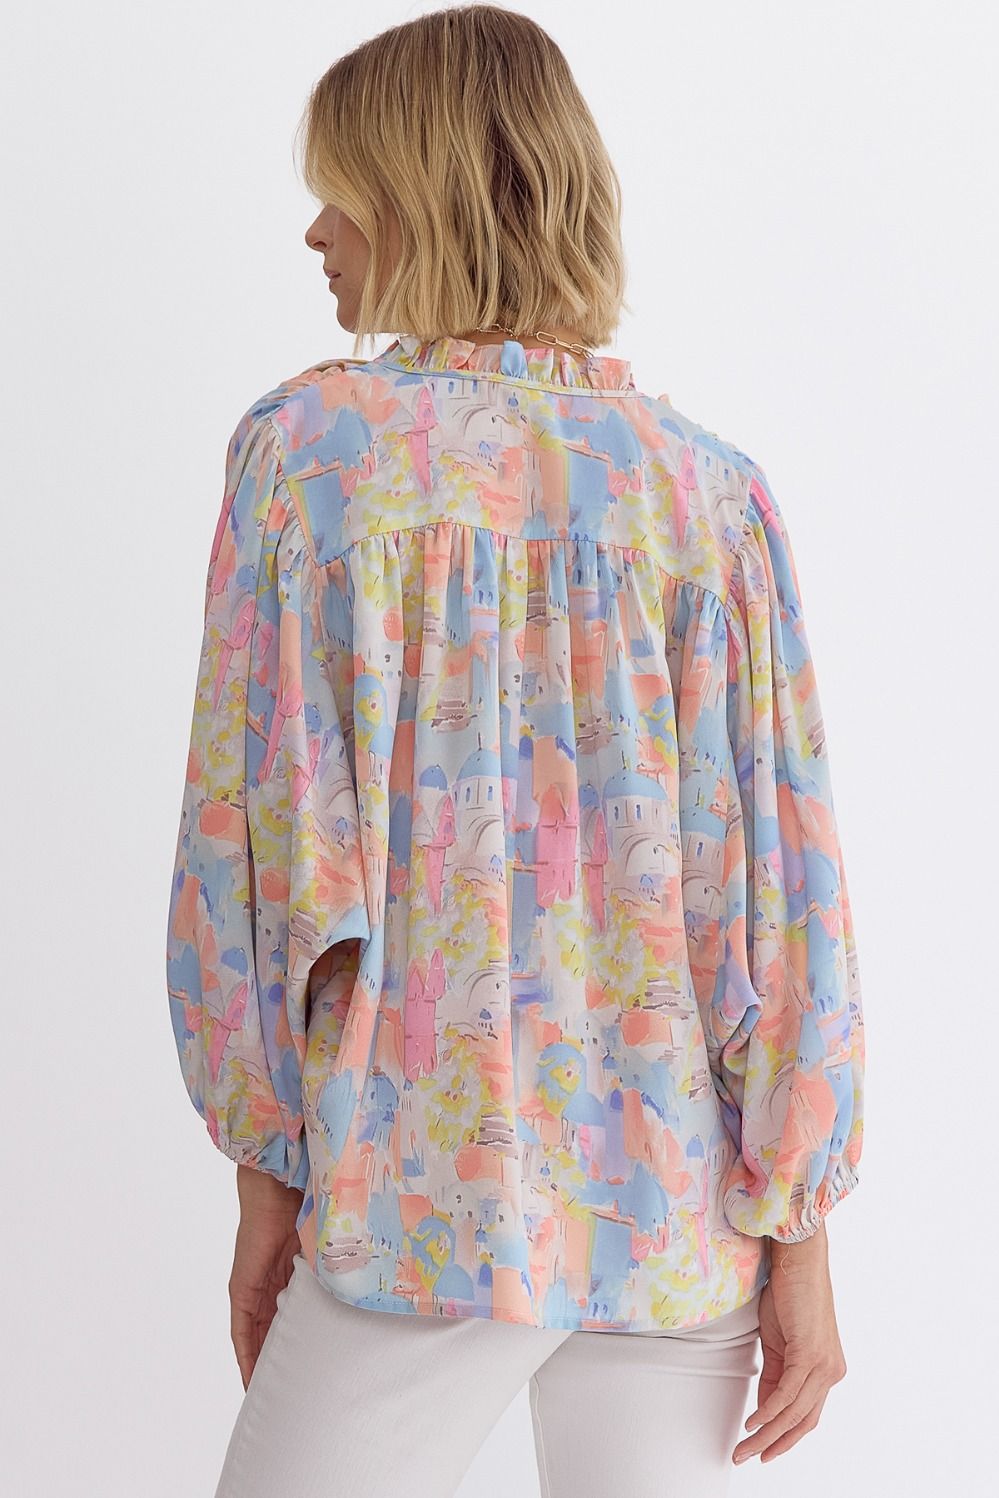 "In The Details" Blouse (Pink) - Happily Ever Aften